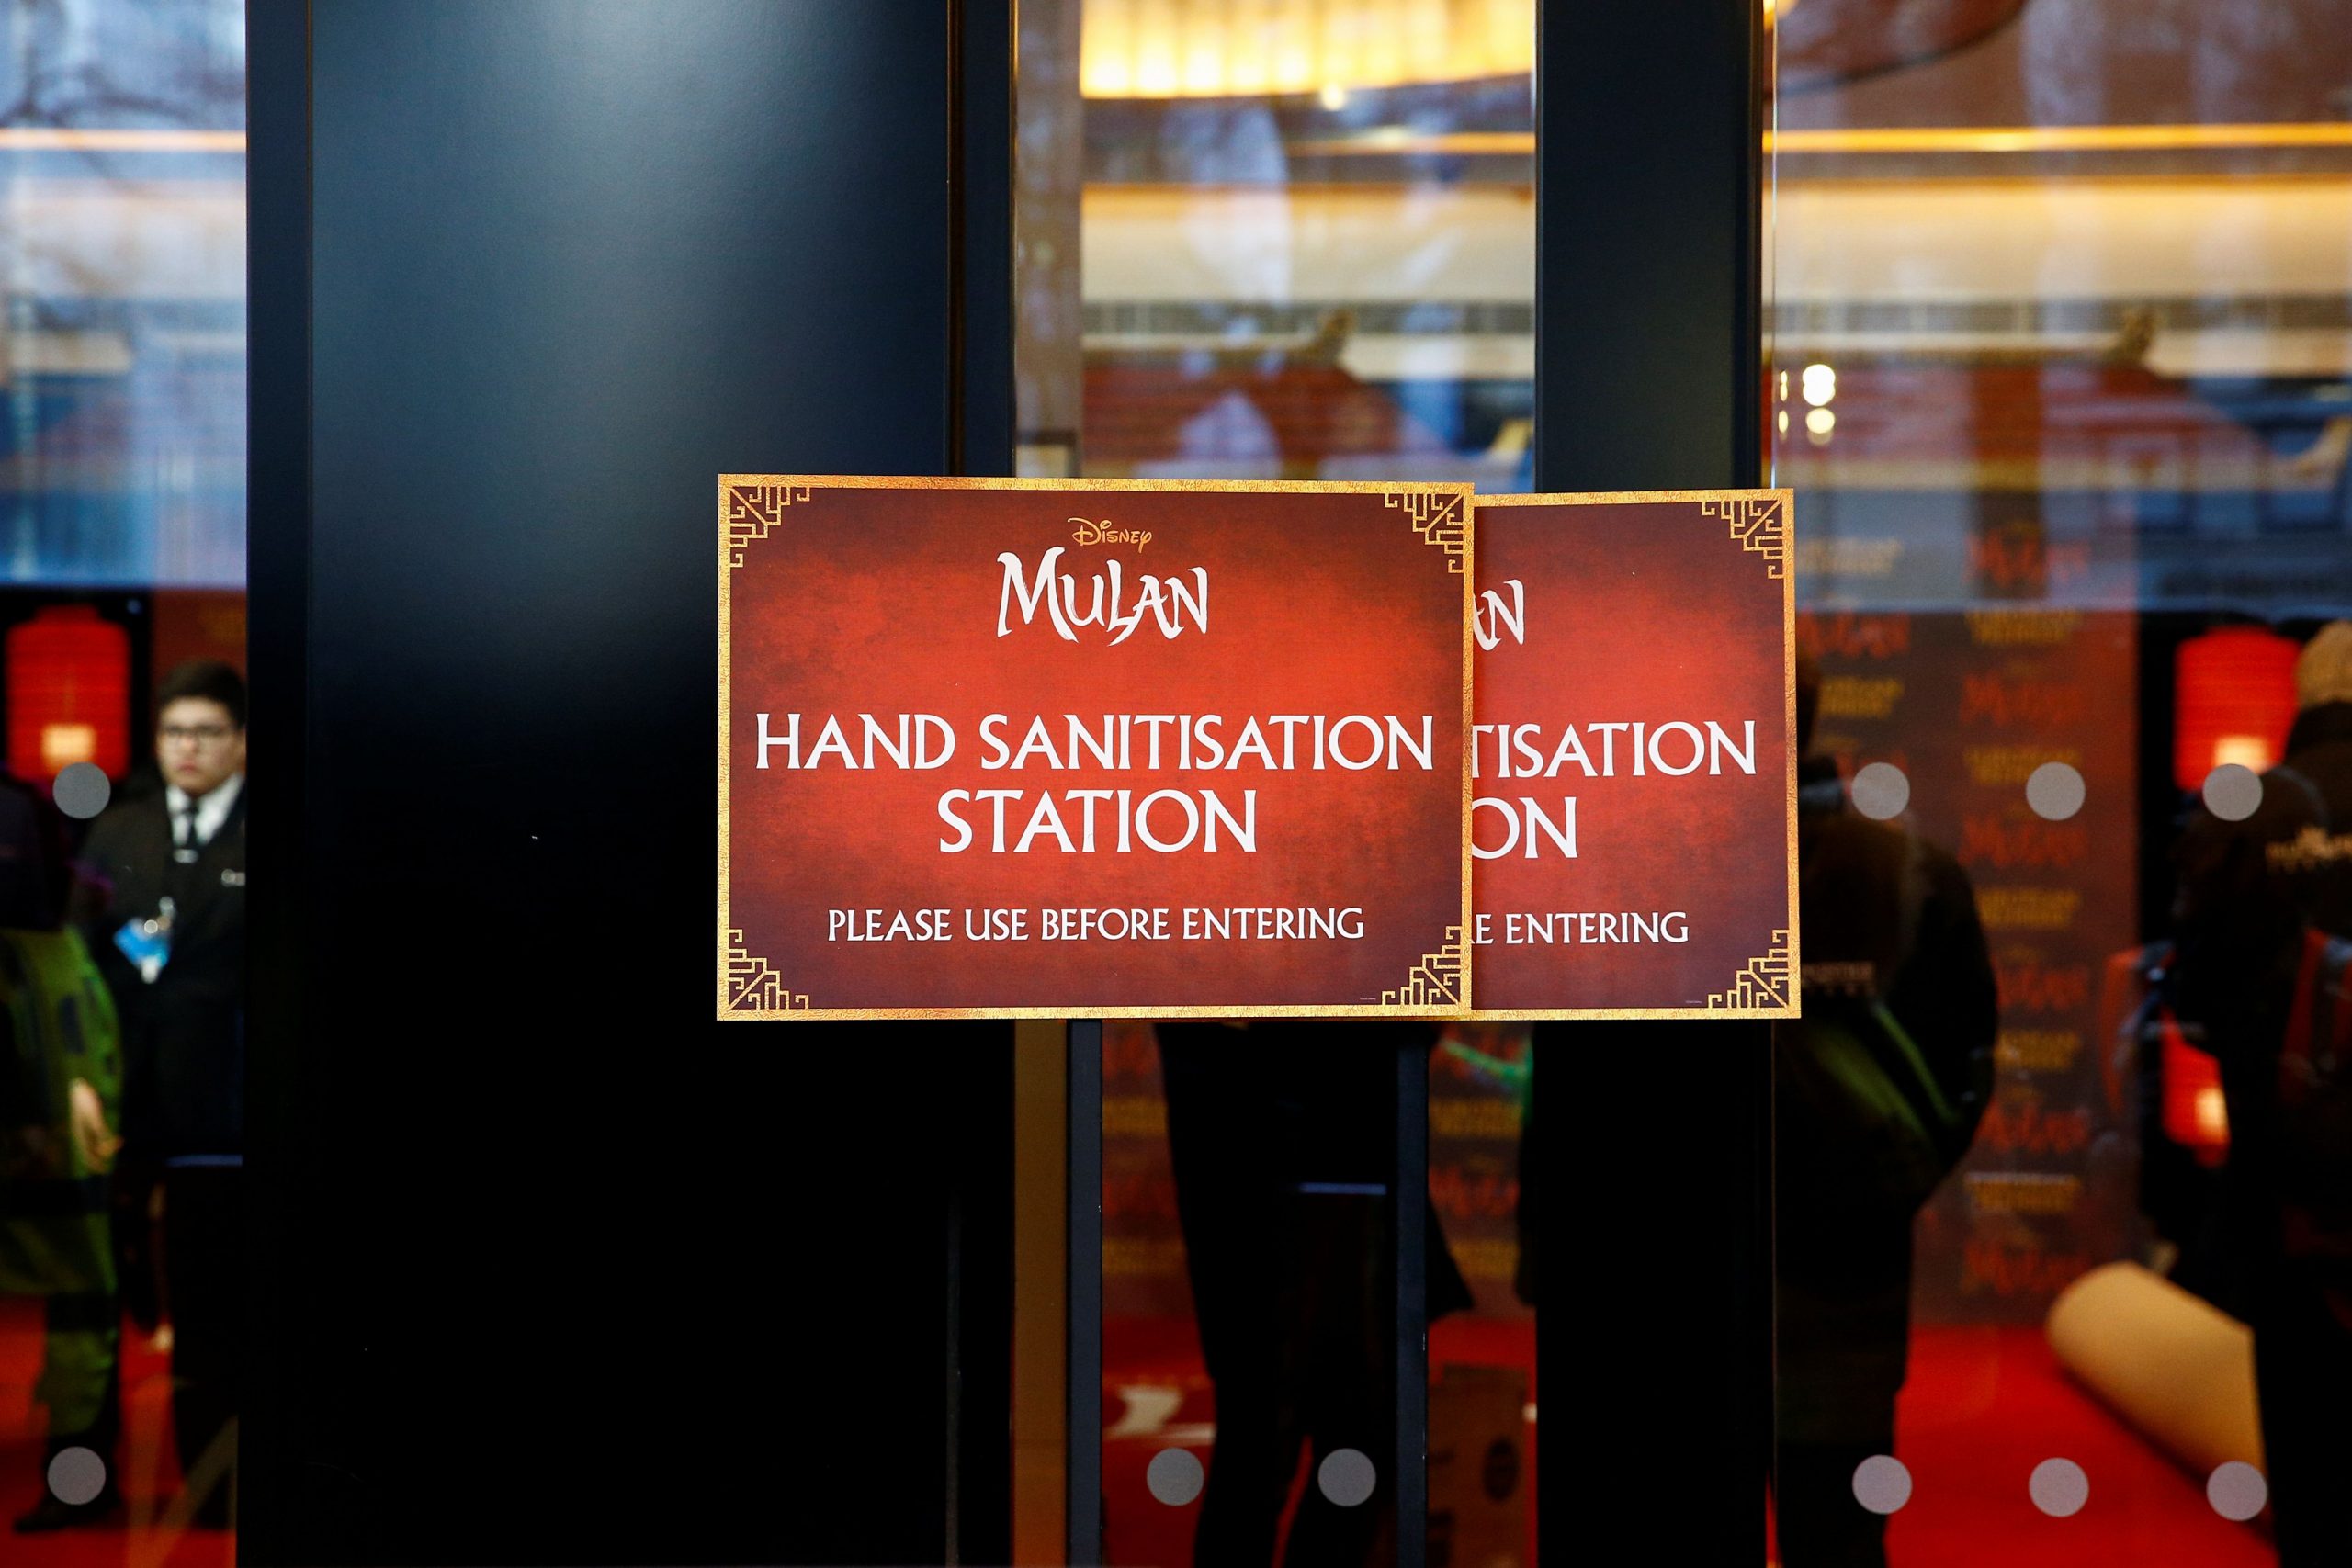 A hand sanitisation station is seen at the European premiere for the film "Mulan", in London, Britain March 12, 2020. REUTERS/Henry Nicholls